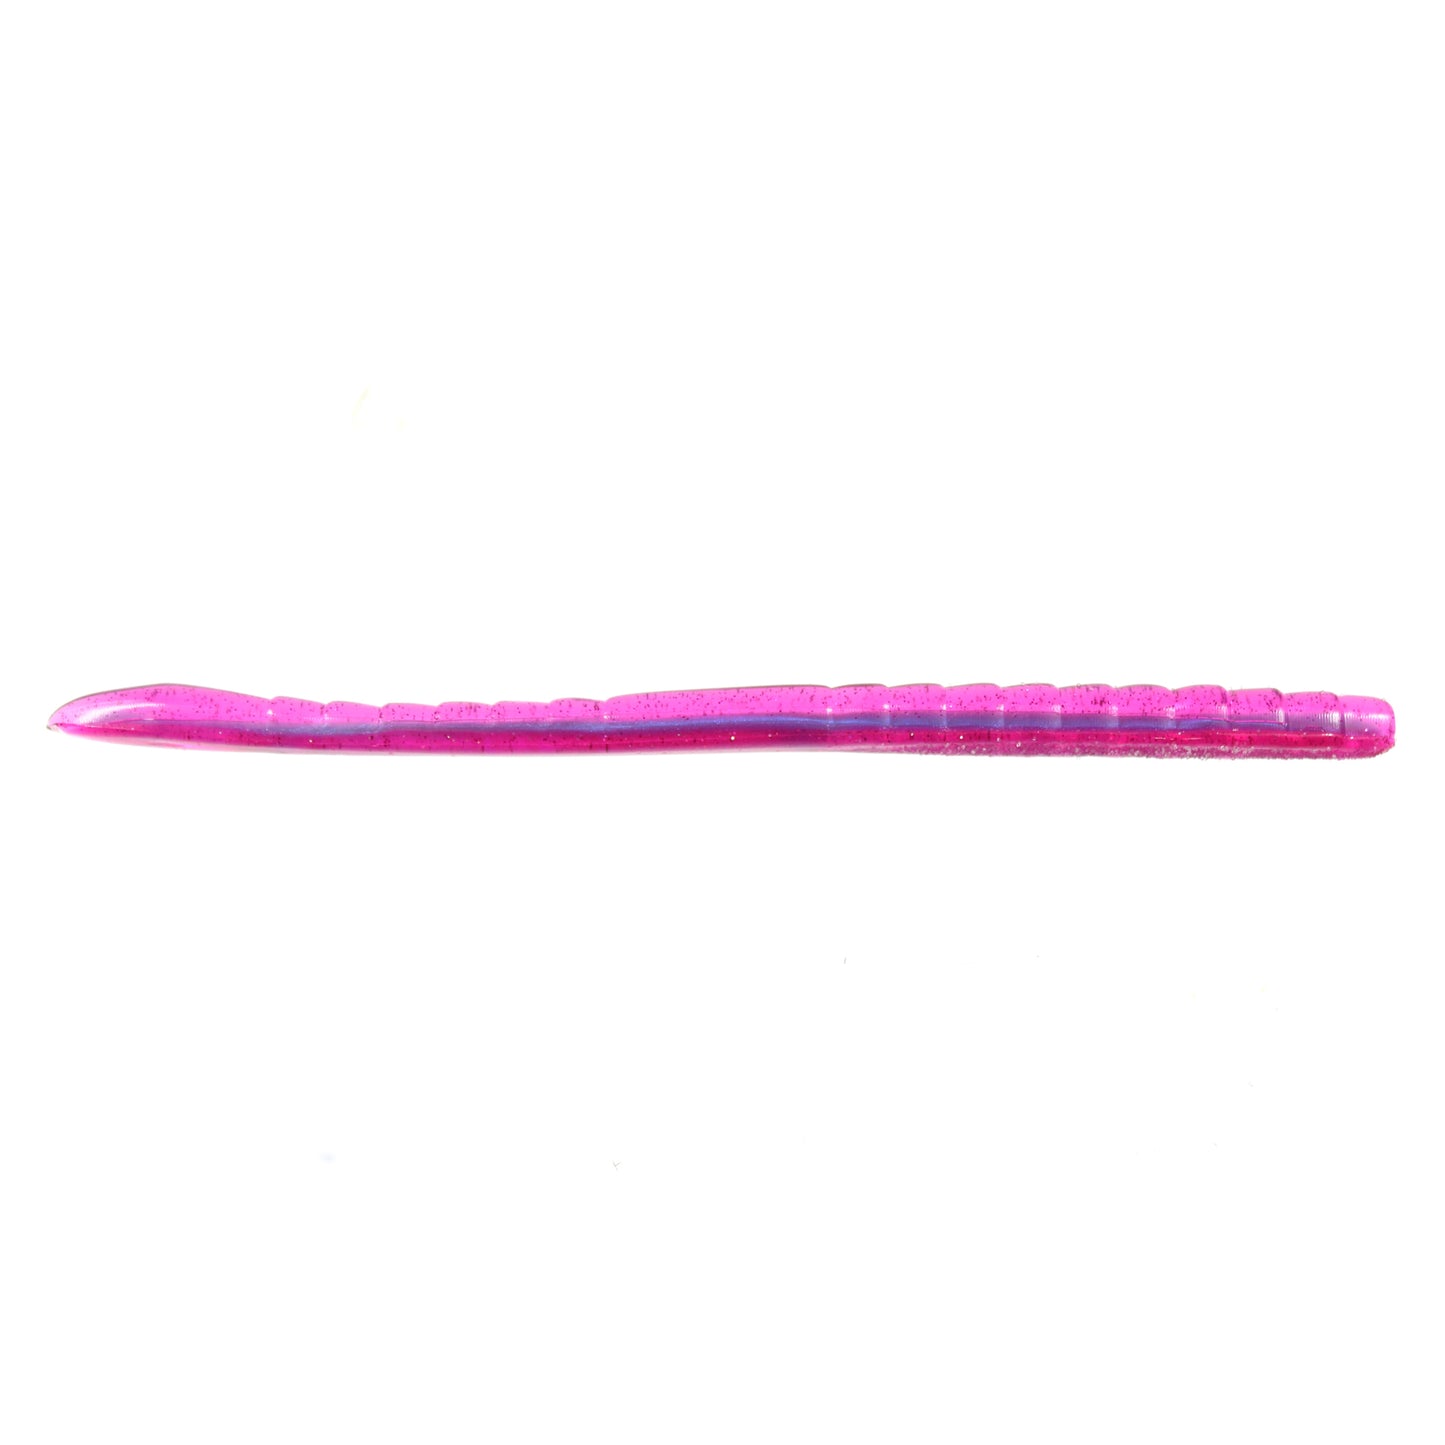 Missile Baits Magic Worm (Double Pack)